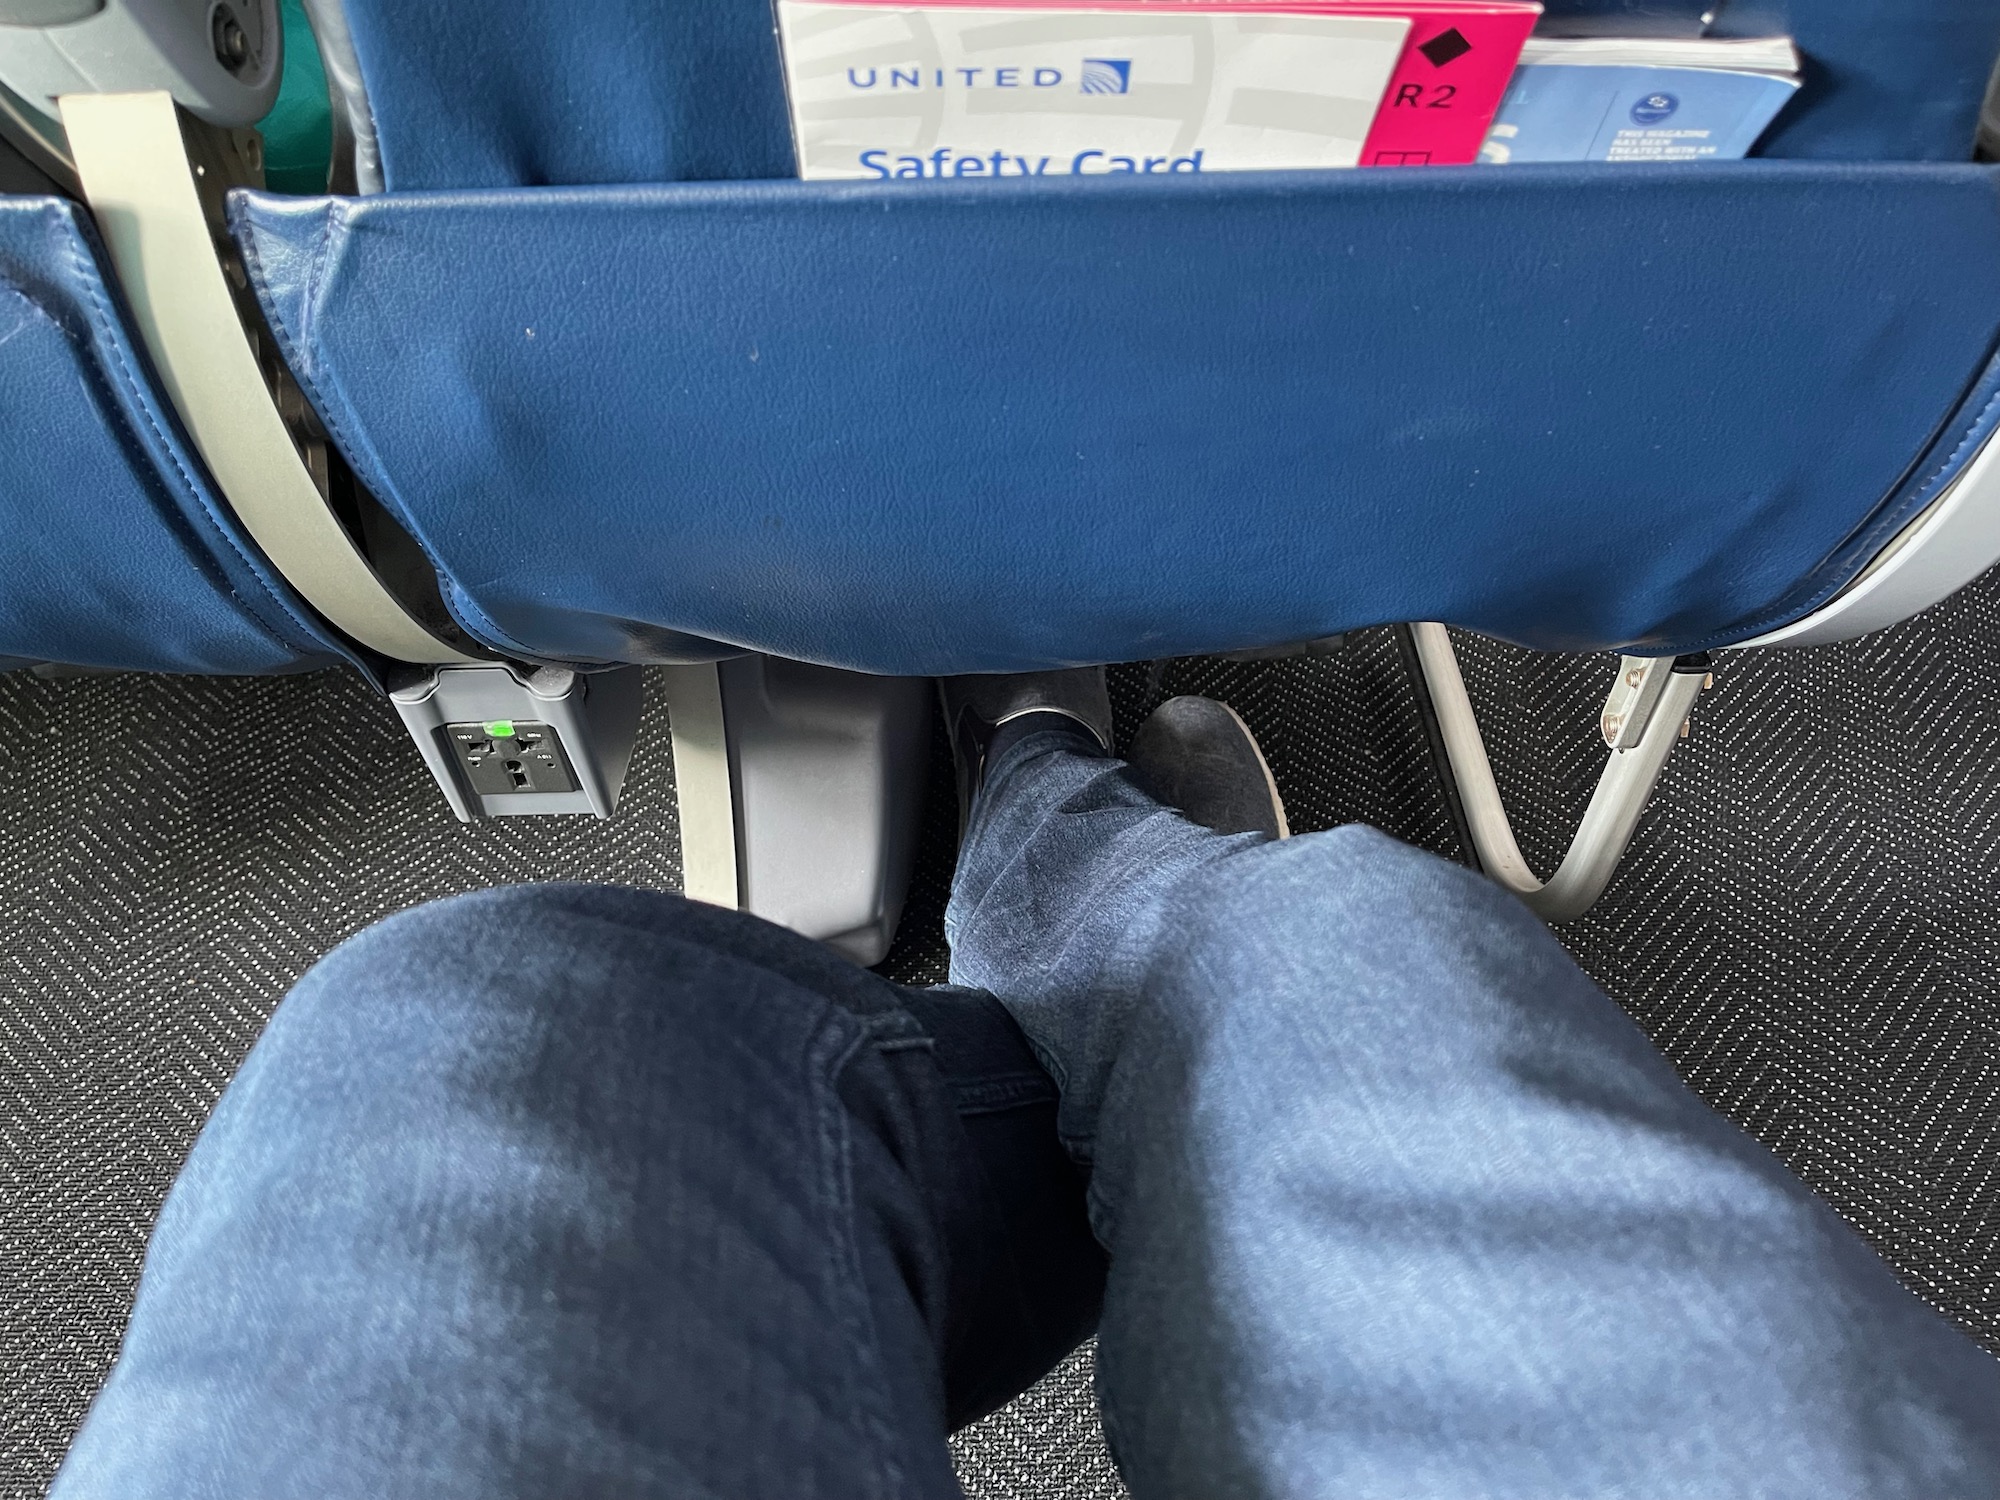 a person's legs and feet in a seat